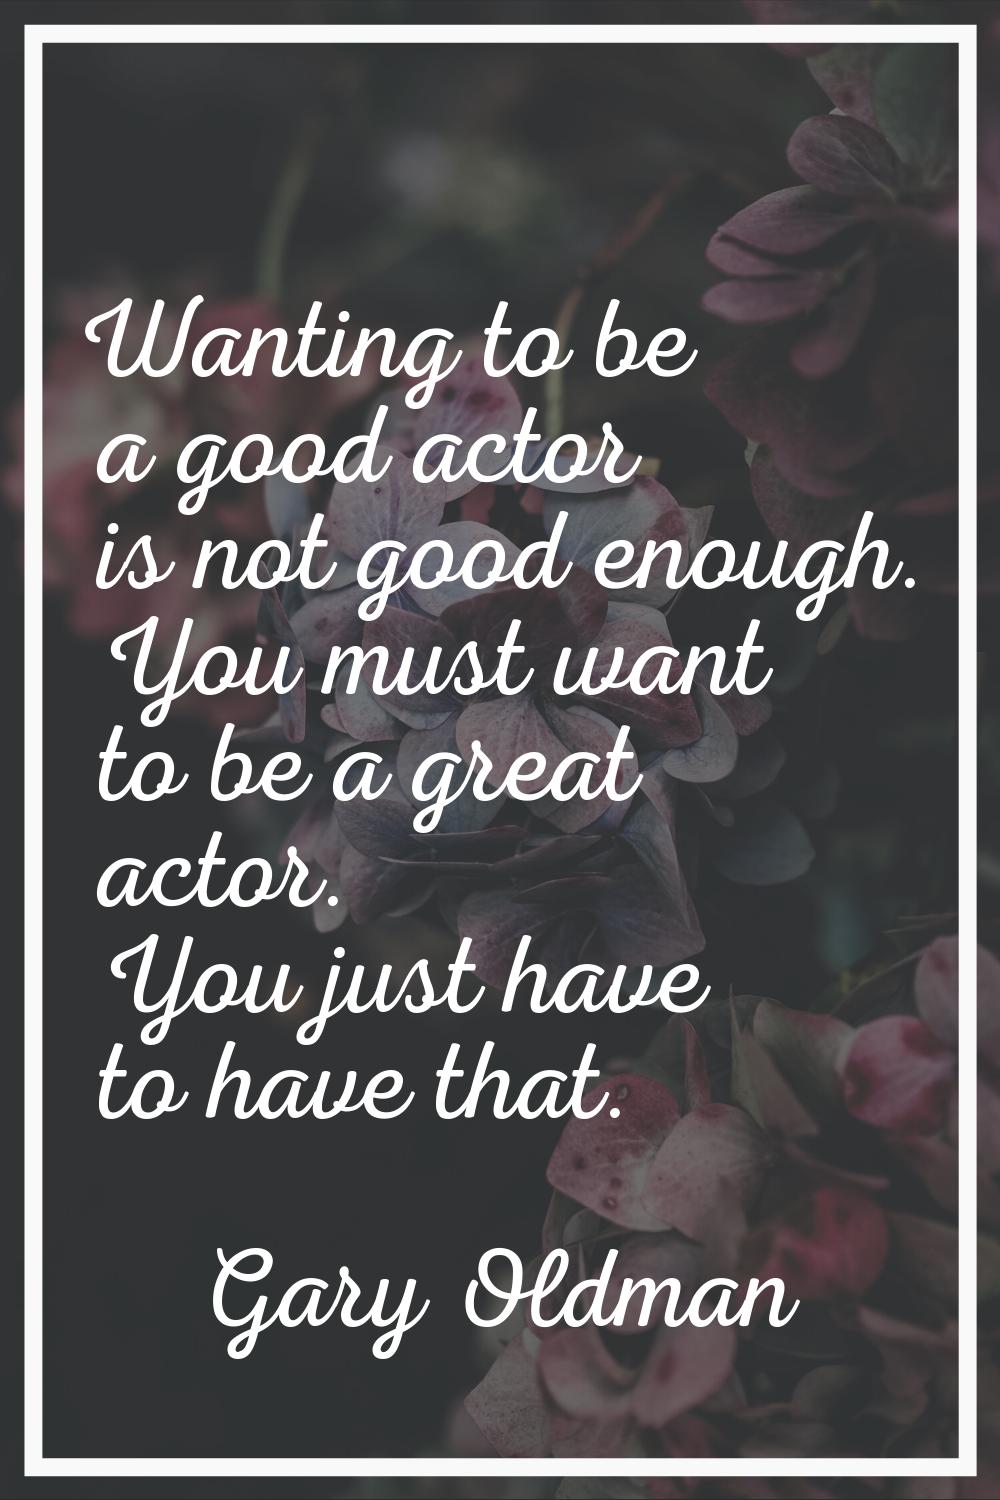 Wanting to be a good actor is not good enough. You must want to be a great actor. You just have to 